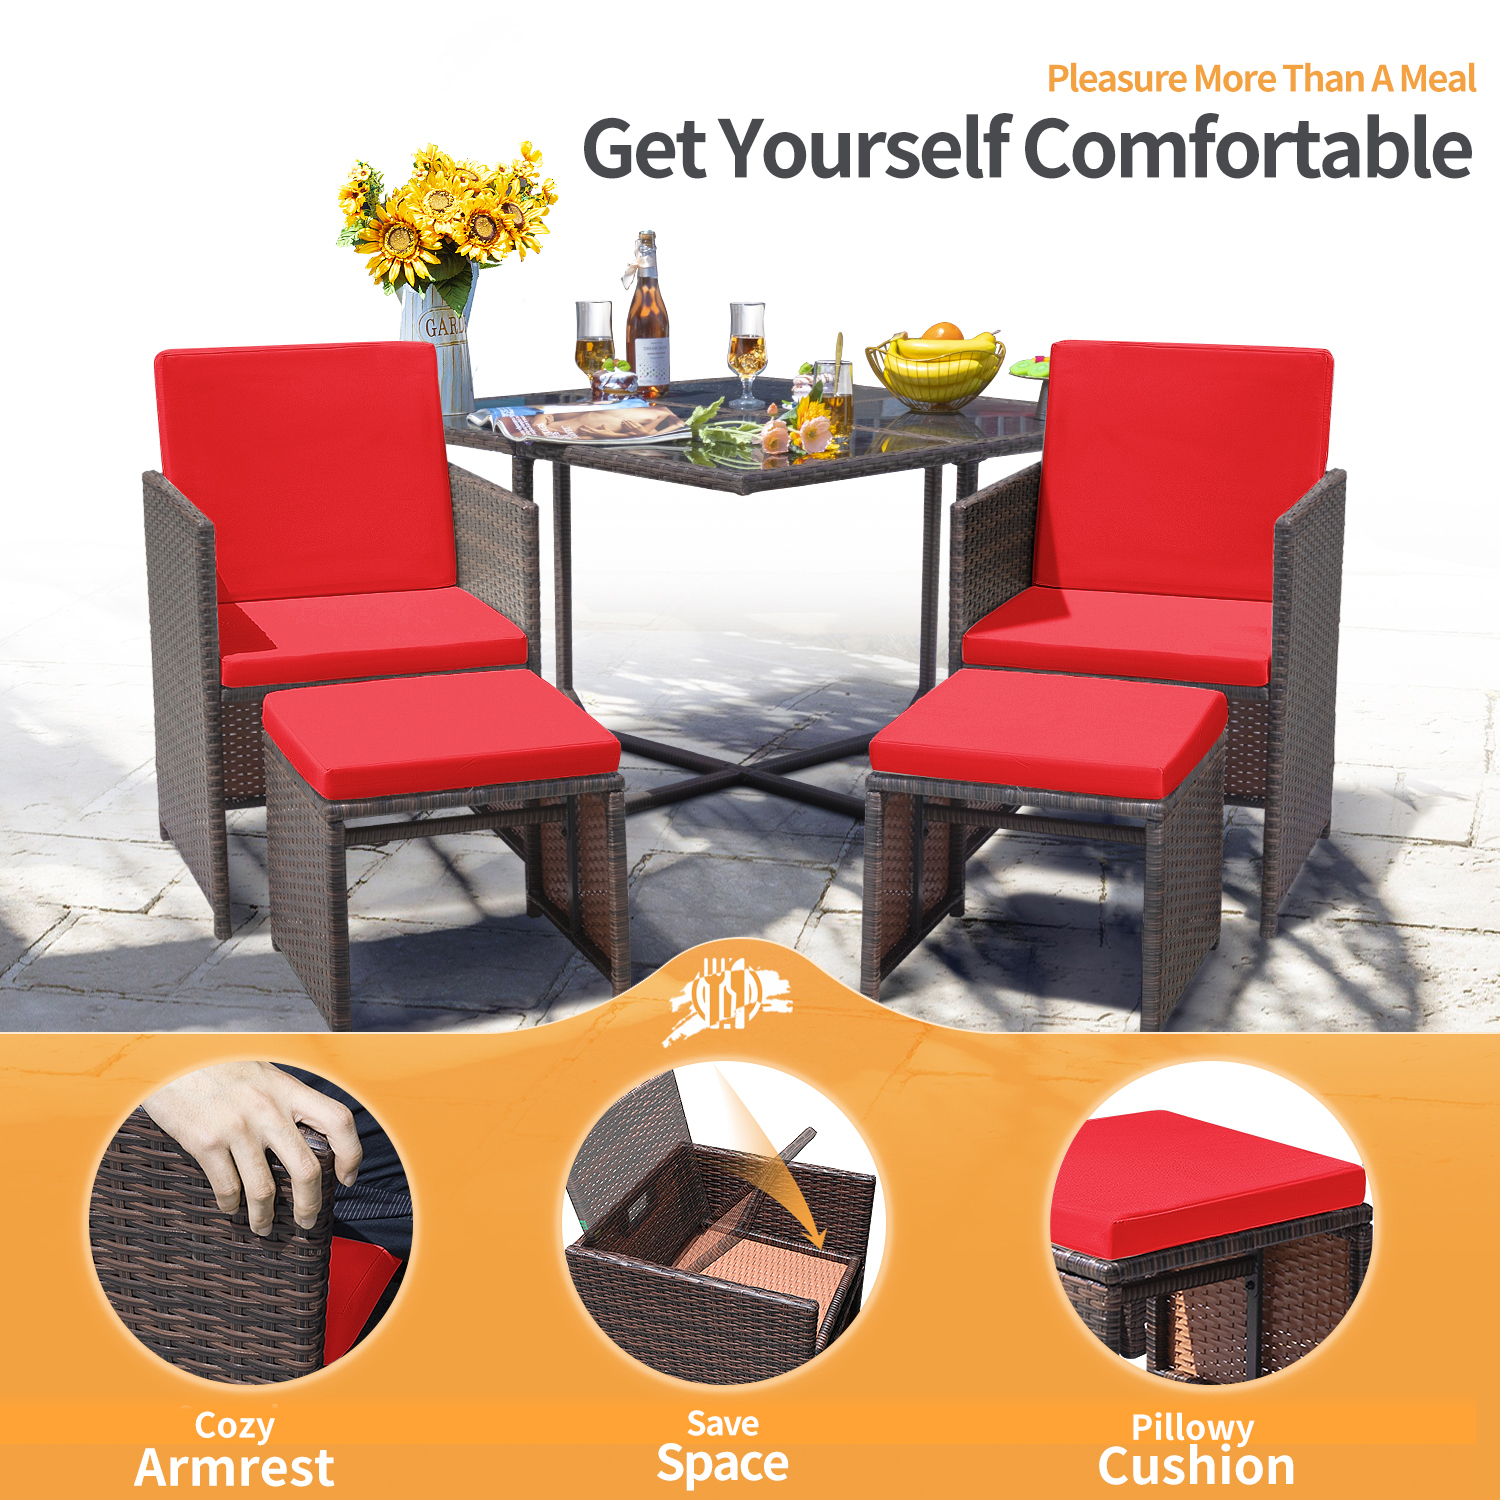 Lacoo 9 Pieces Patio Dining Sets Outdoor Indoor Furniture Patio Wicker Rattan Chairs and Tempered Glass Table Sectional Set Conversation Set Cushioned with Ottoman, Red, 8 - image 5 of 7